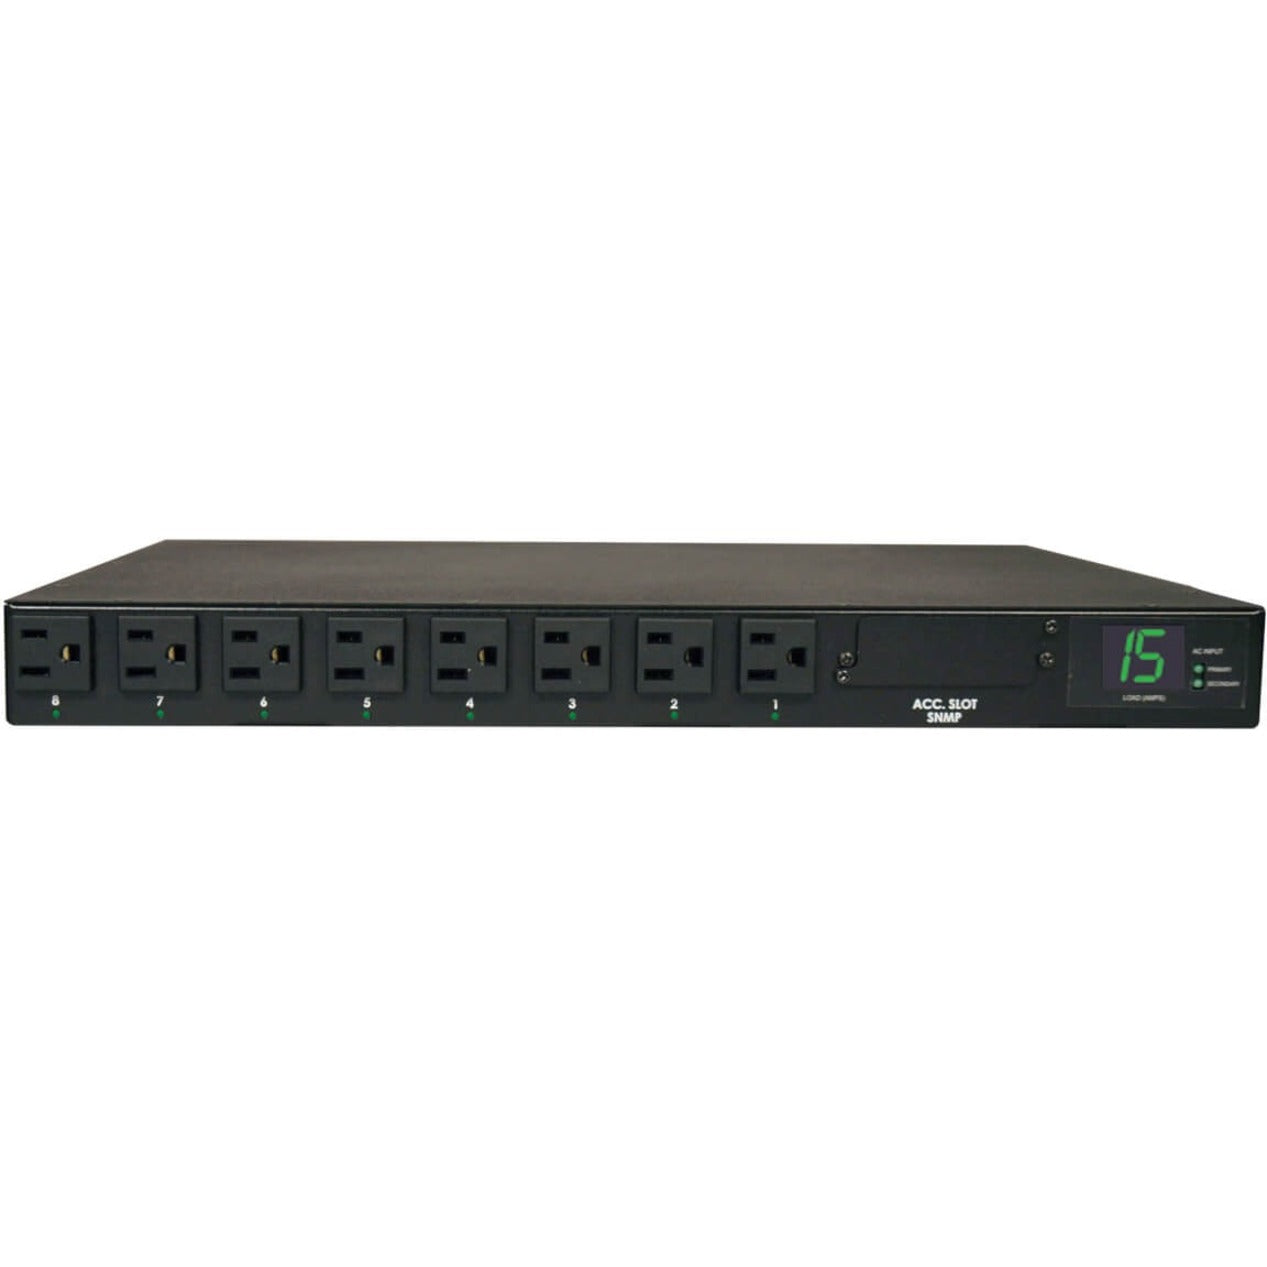 Tripp Lite PDUMH15AT PDU Metered ATS 120V 15A 8 Outlet, Dual UPS Protection, Remote Outlet Control